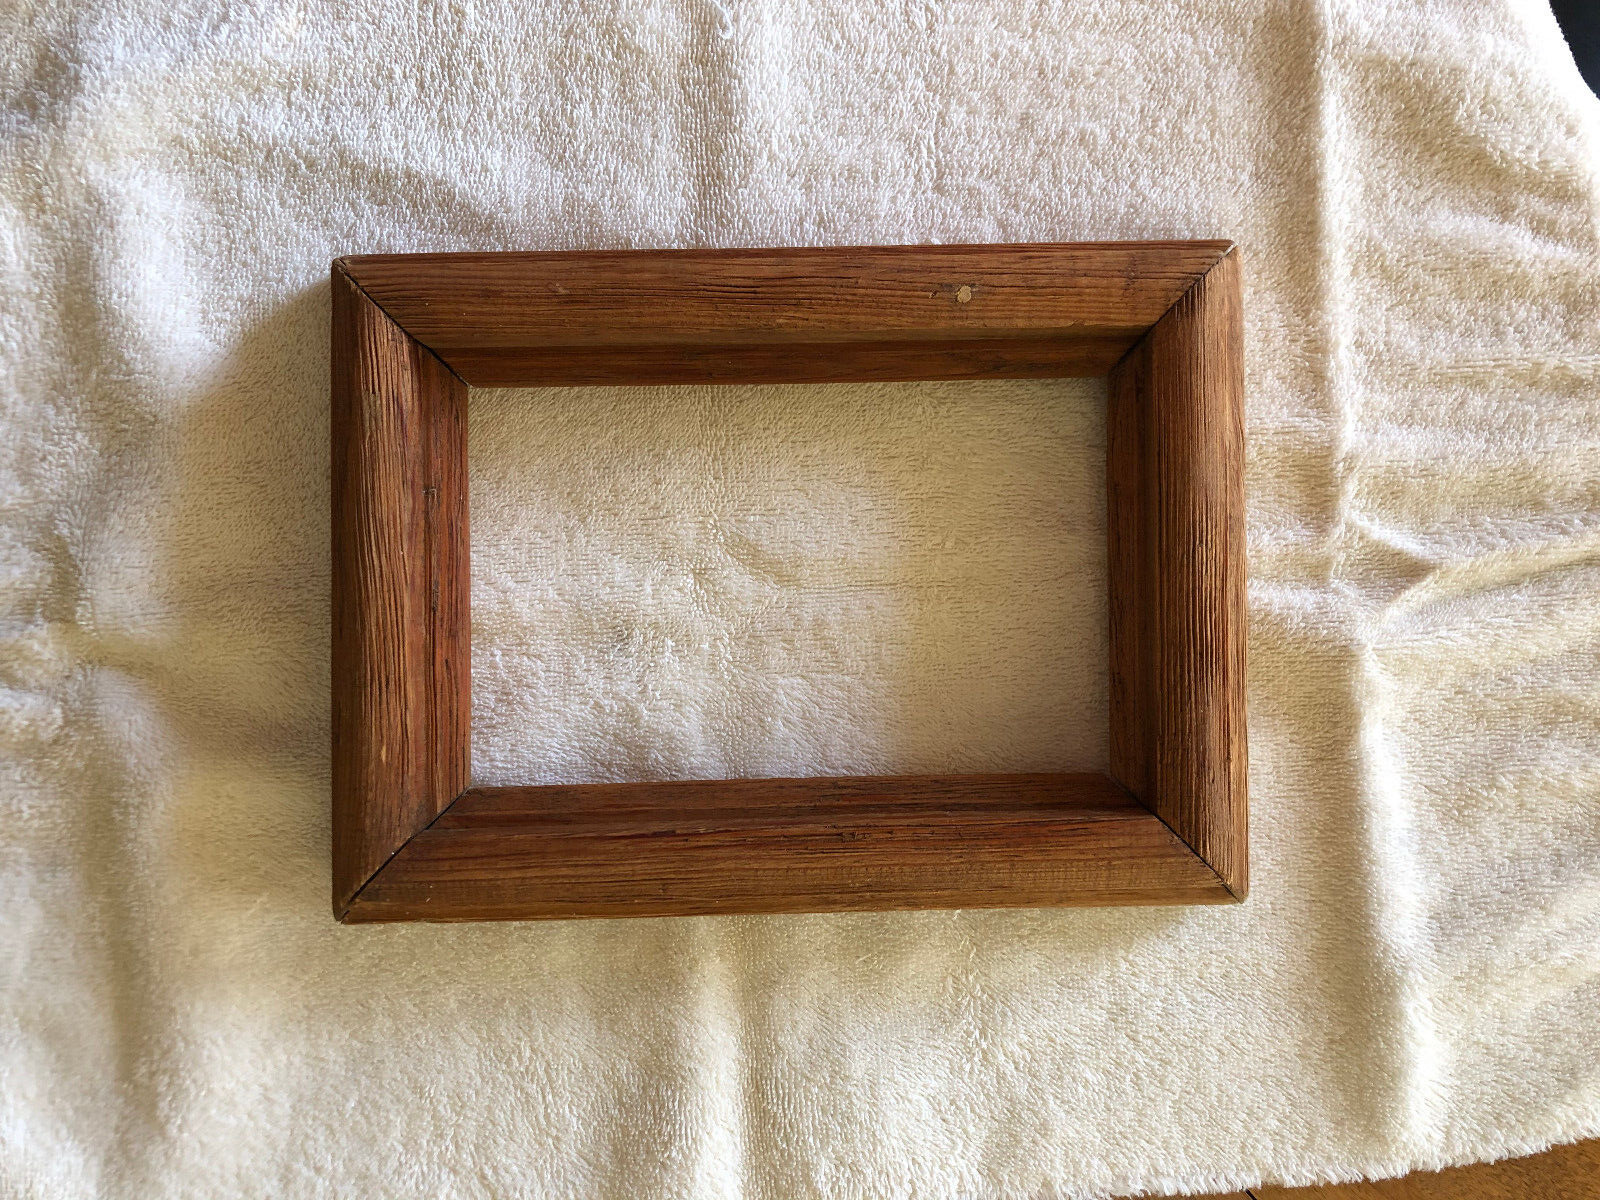 Antique Wood Picture Frame, Handmade, Deep, Hard to Find Odd Size Fits 5 x 8 GUC